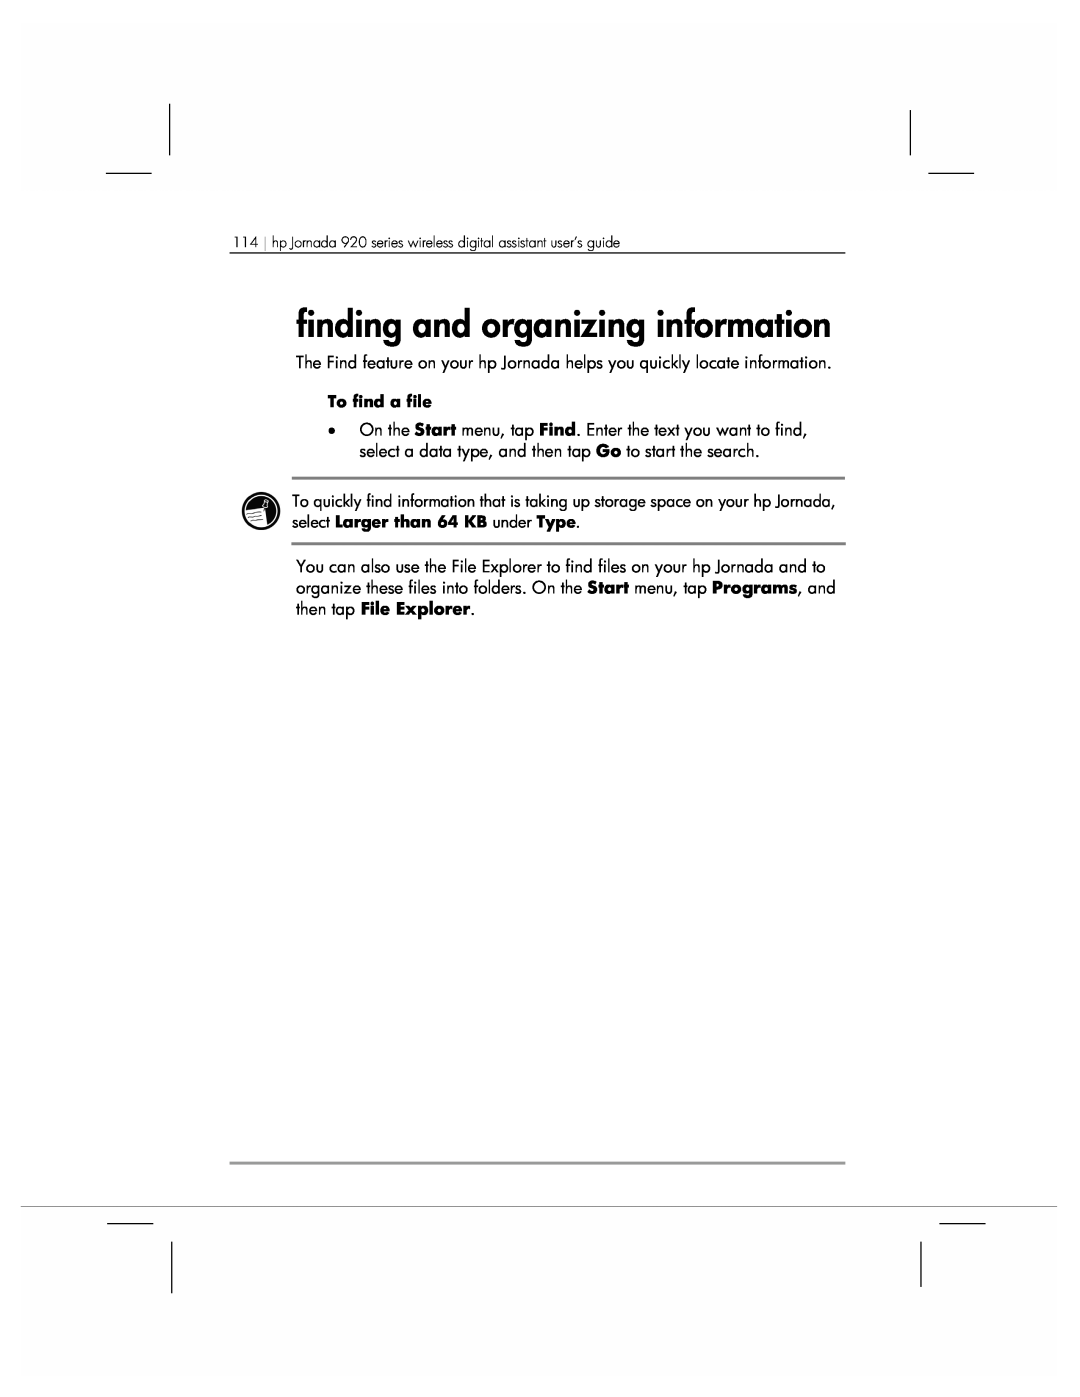 HP 920 manual finding and organizing information, To find a file 